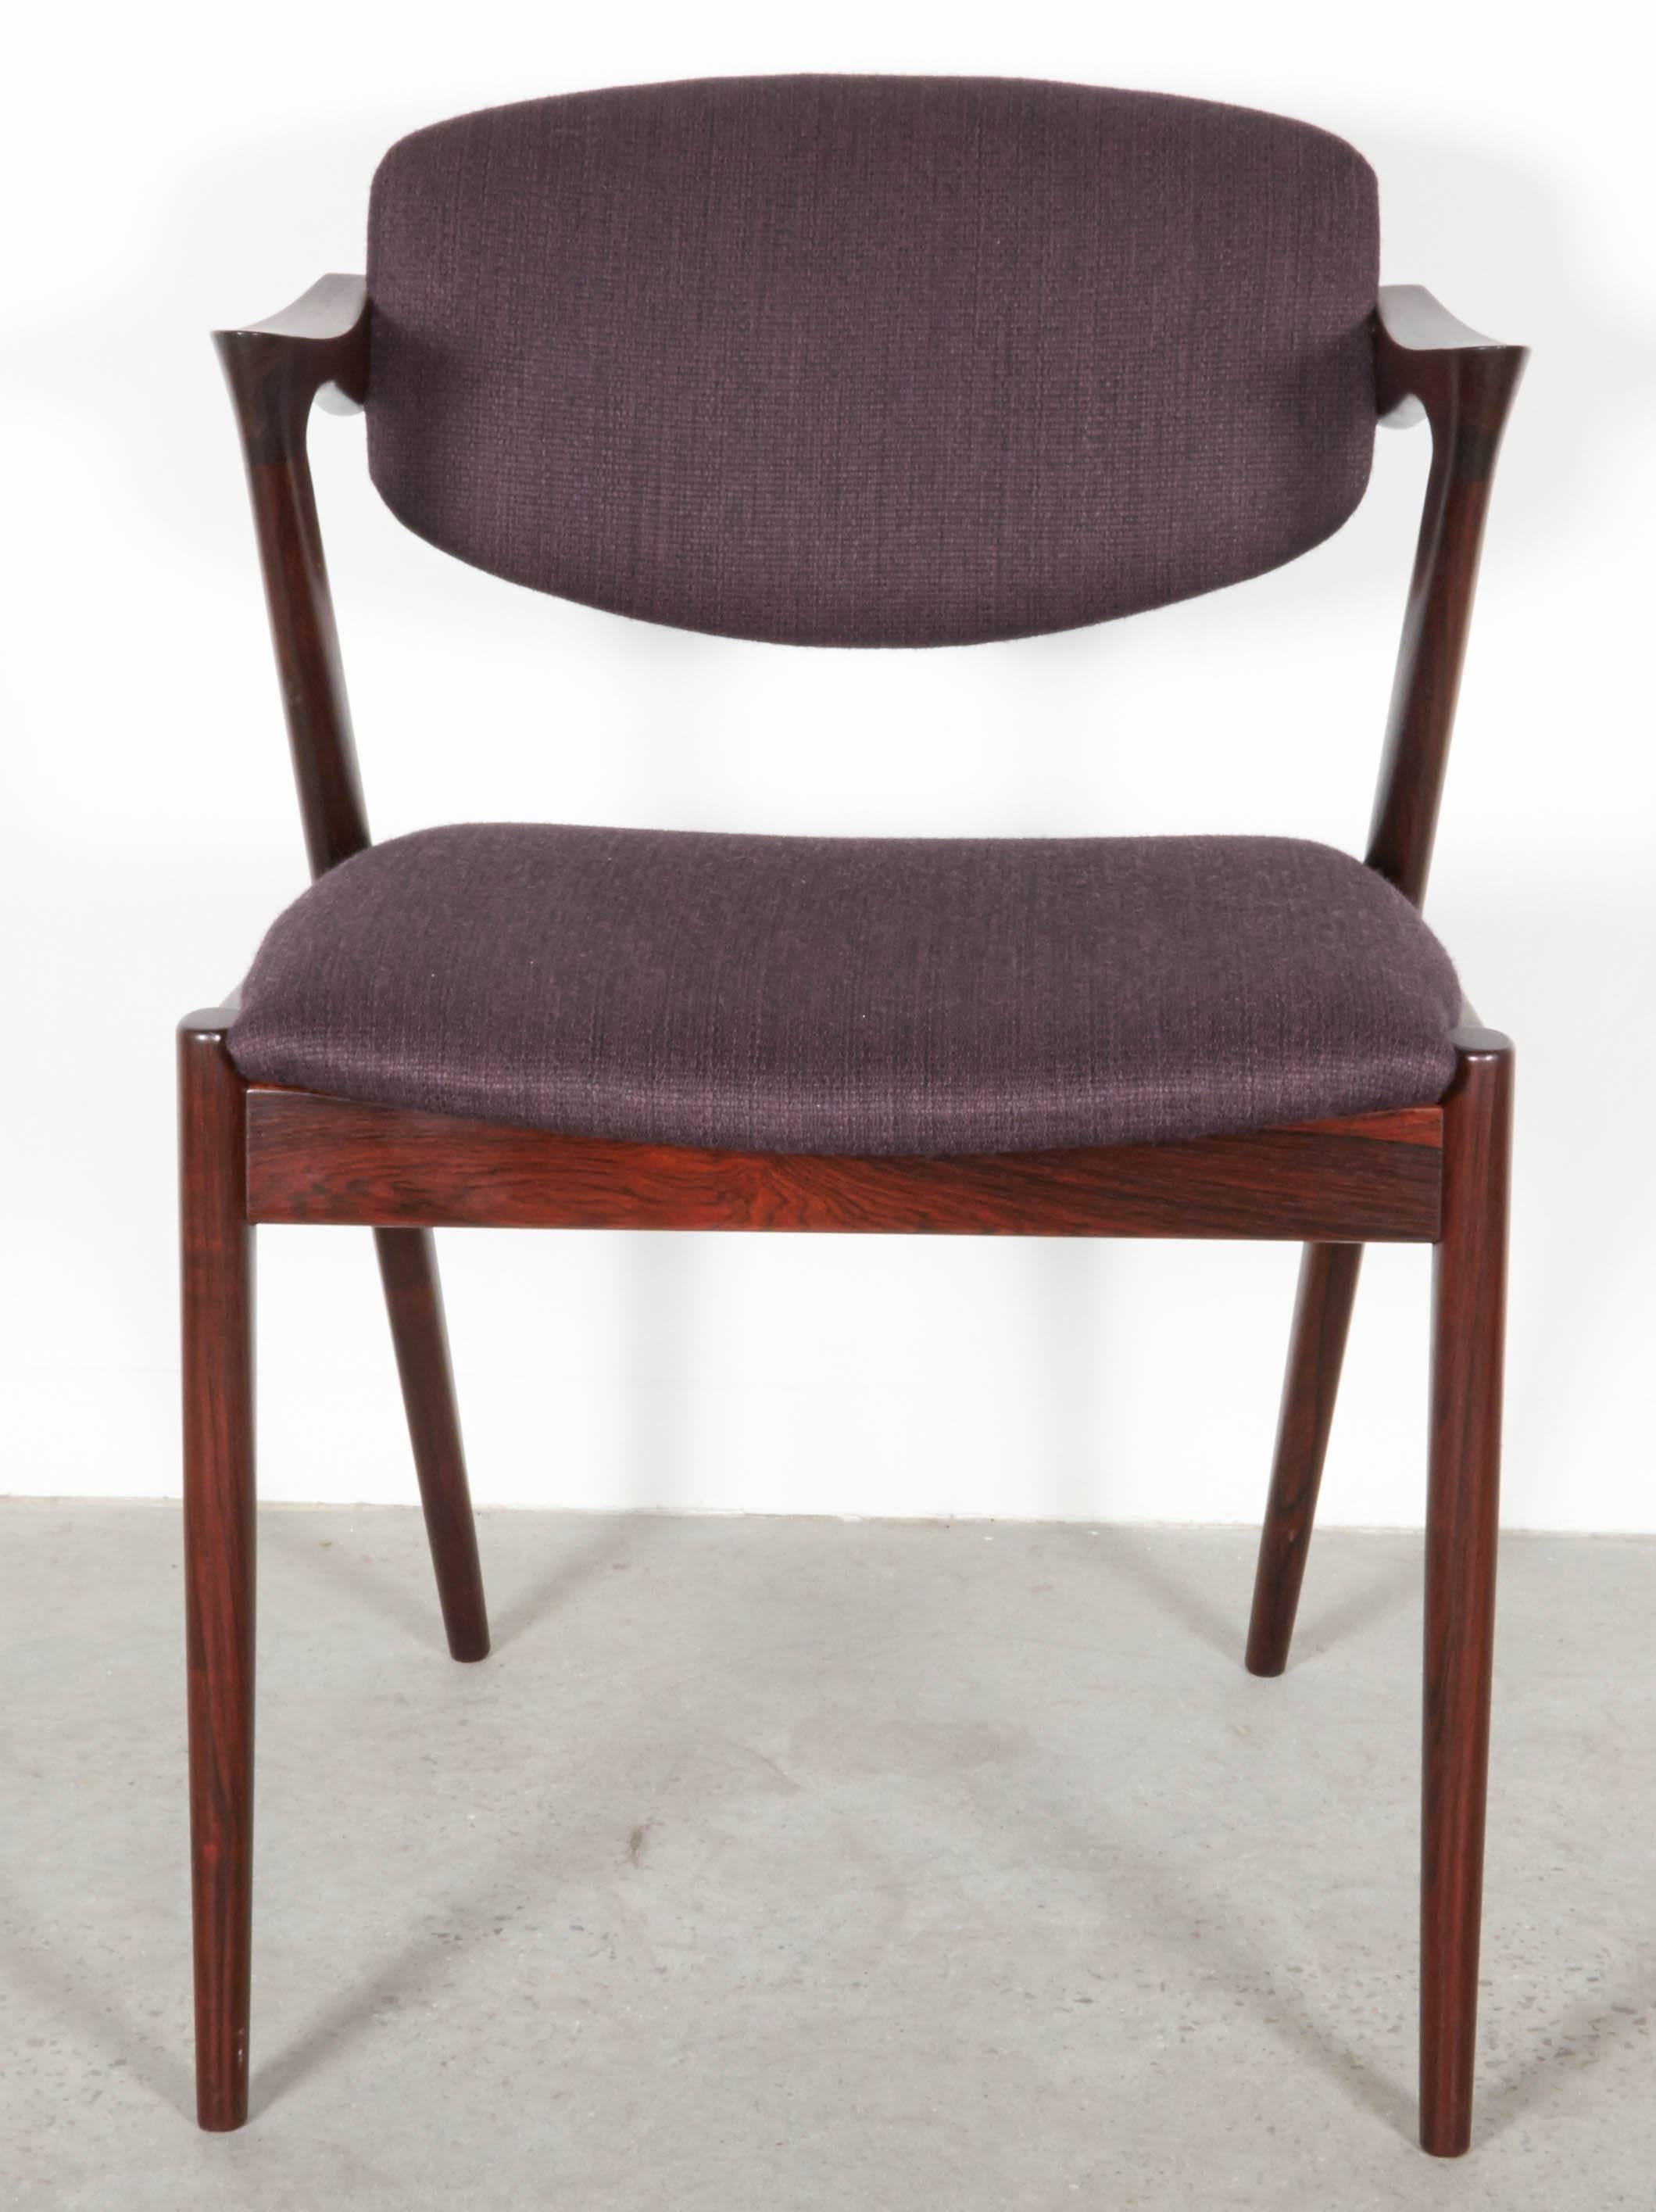 Vintage 1950s Rosewood Danish Dining Chairs by Kai Kristiansen.

These vintage side chairs are in like-new condition. The swivel back that adjust to your back makes it like a little lounge chair at the dining table. The most comfortable dining